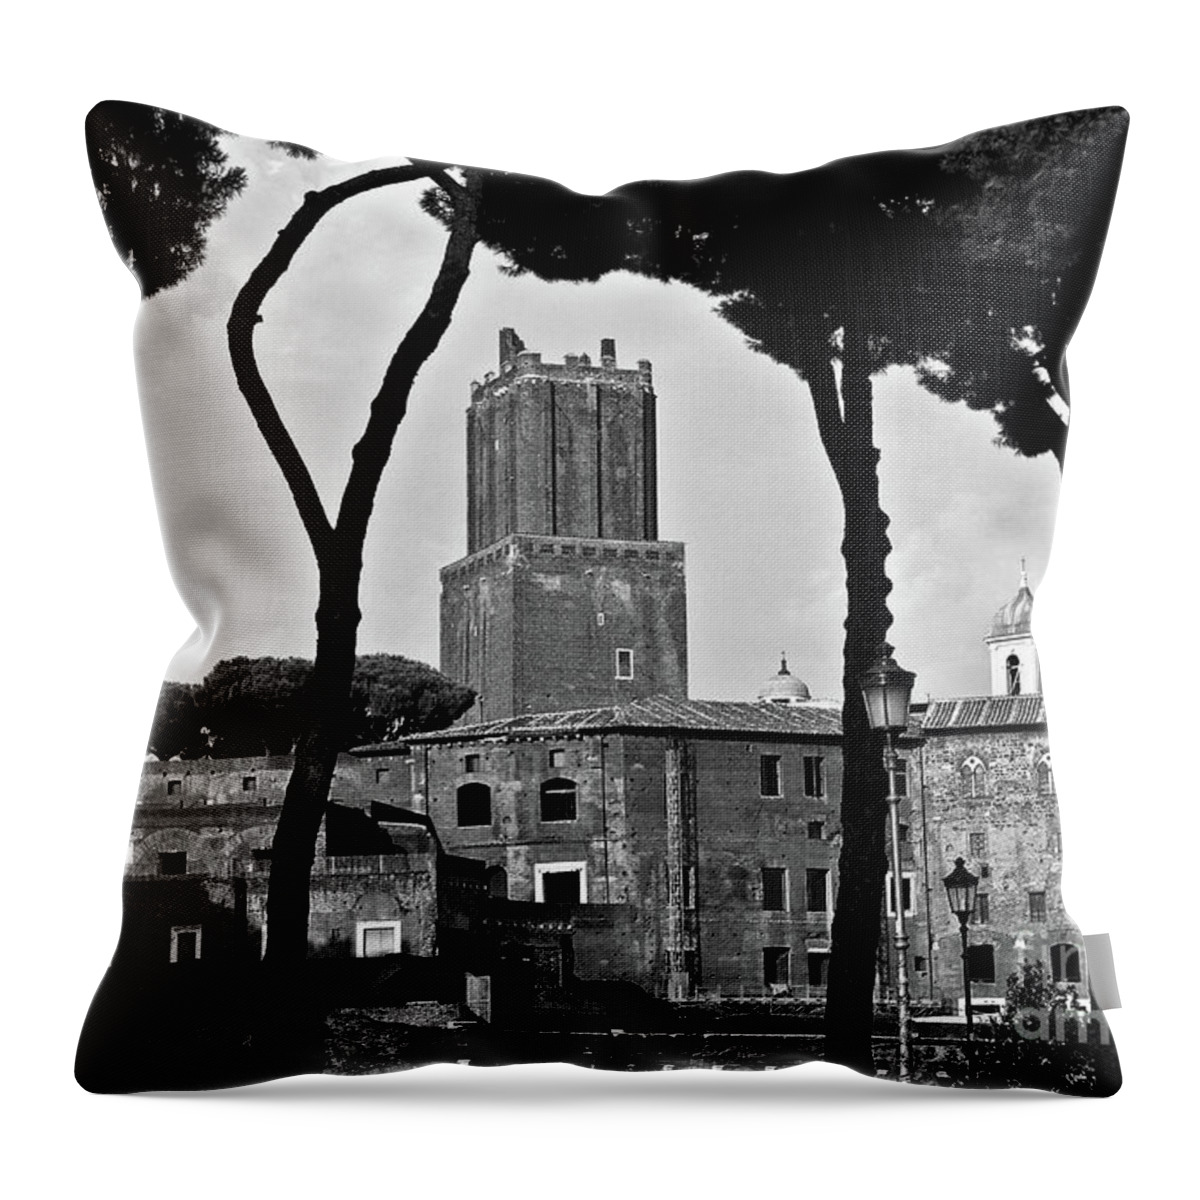 Italy Throw Pillow featuring the photograph Eternal City of Rome by Silva Wischeropp